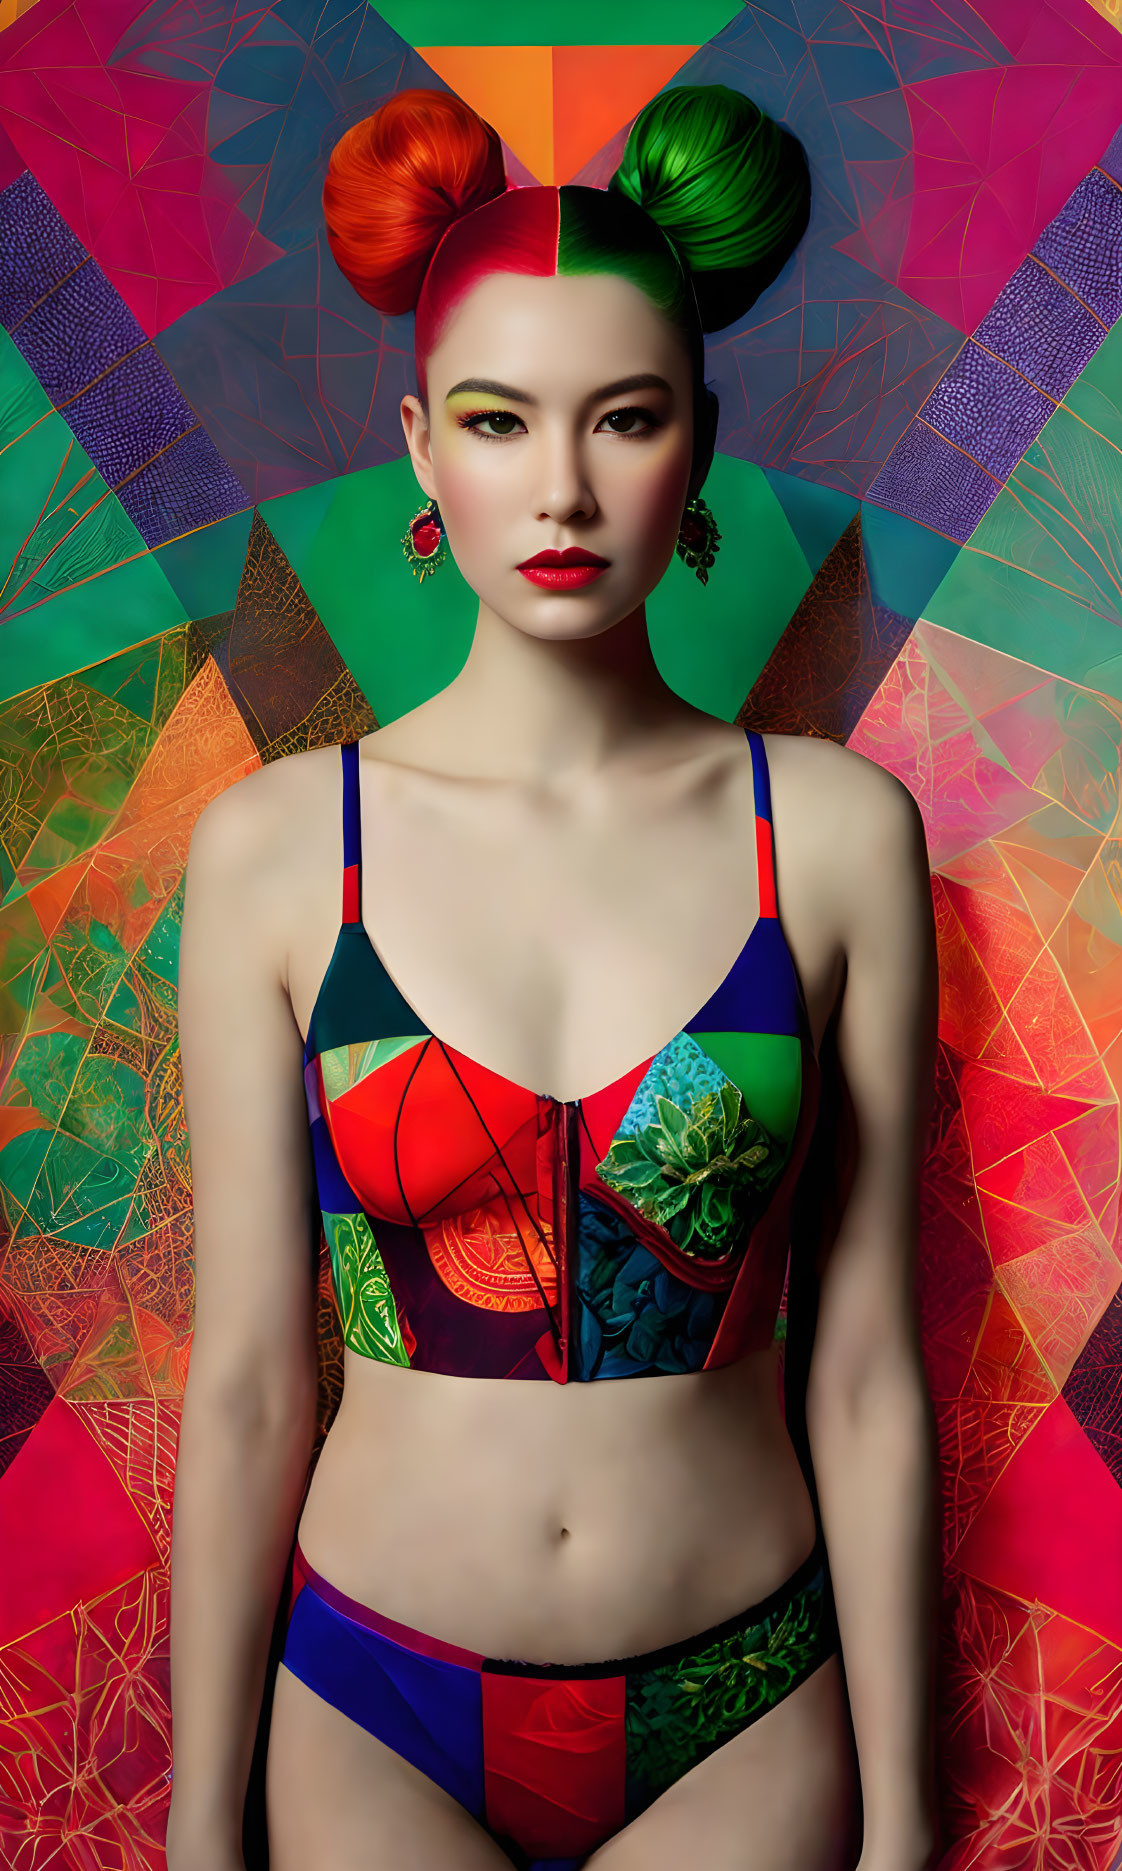 Colorful Split Hair Buns & Geometric Outfit Against Abstract Background